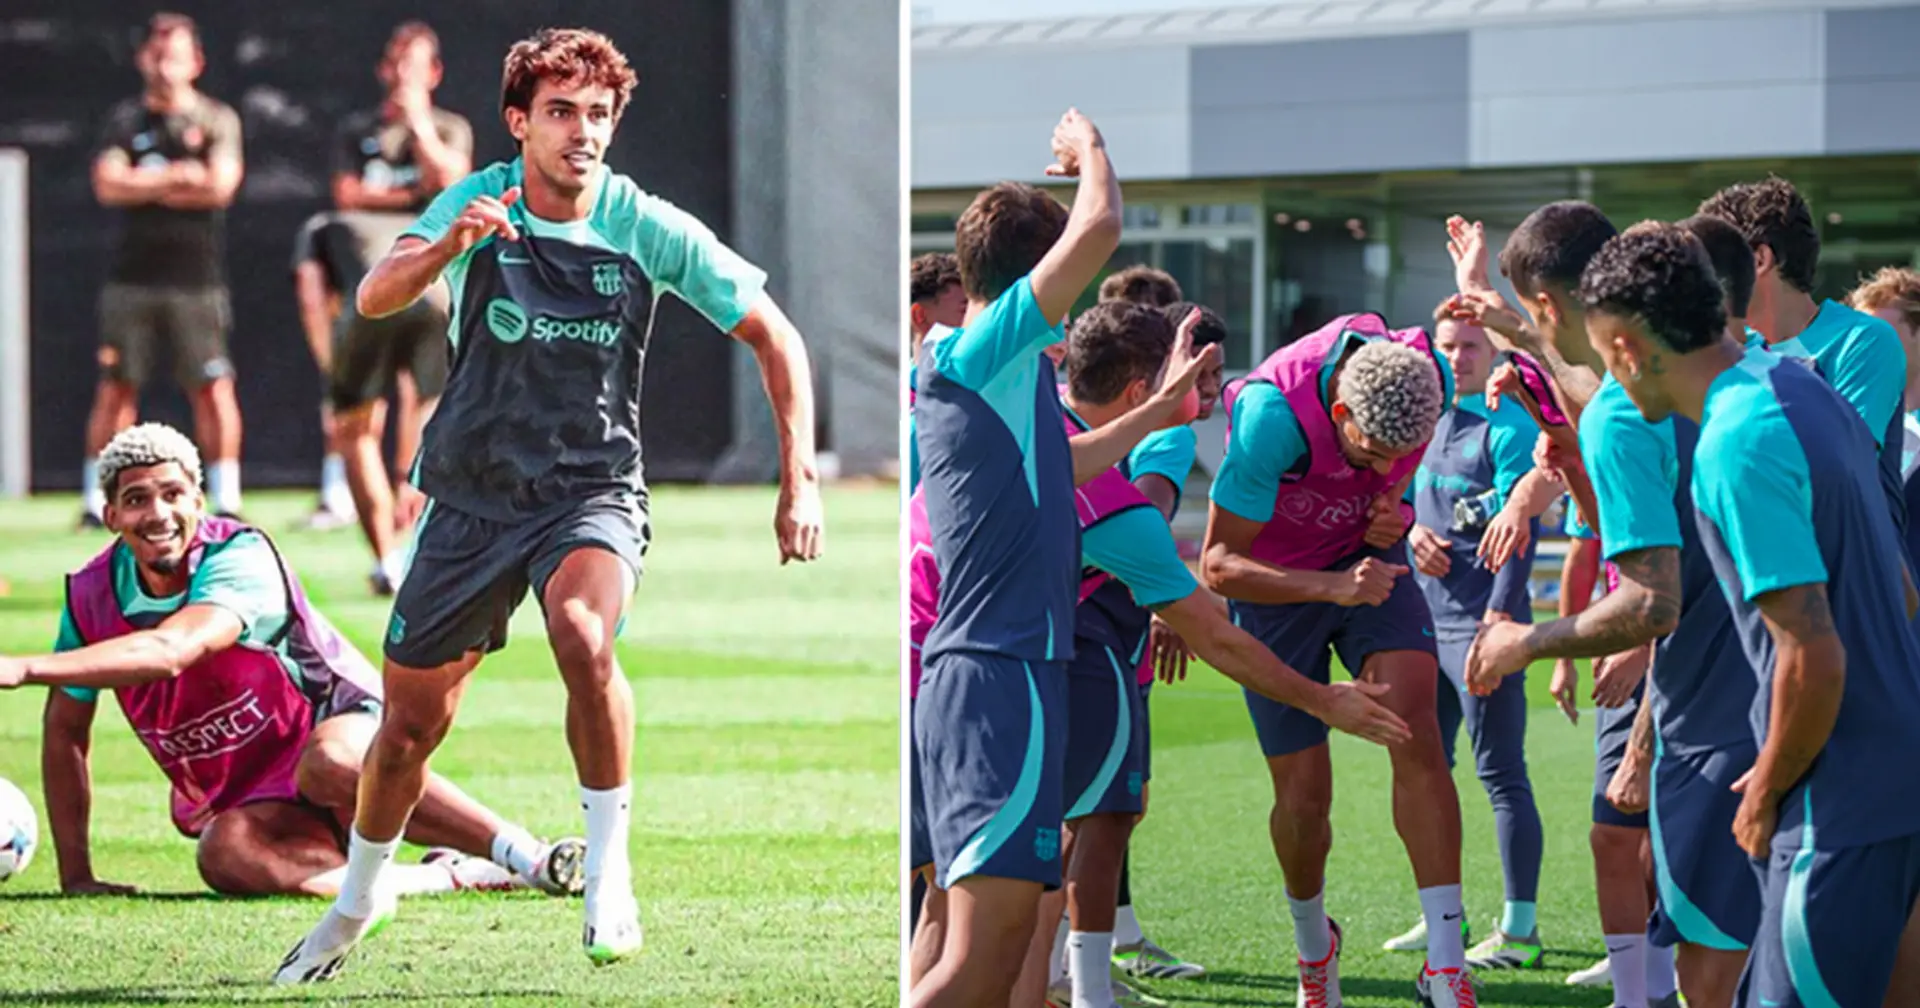 Guard of honour for Araujo and 10 more pics from Barca's final training session ahead of Antwerp